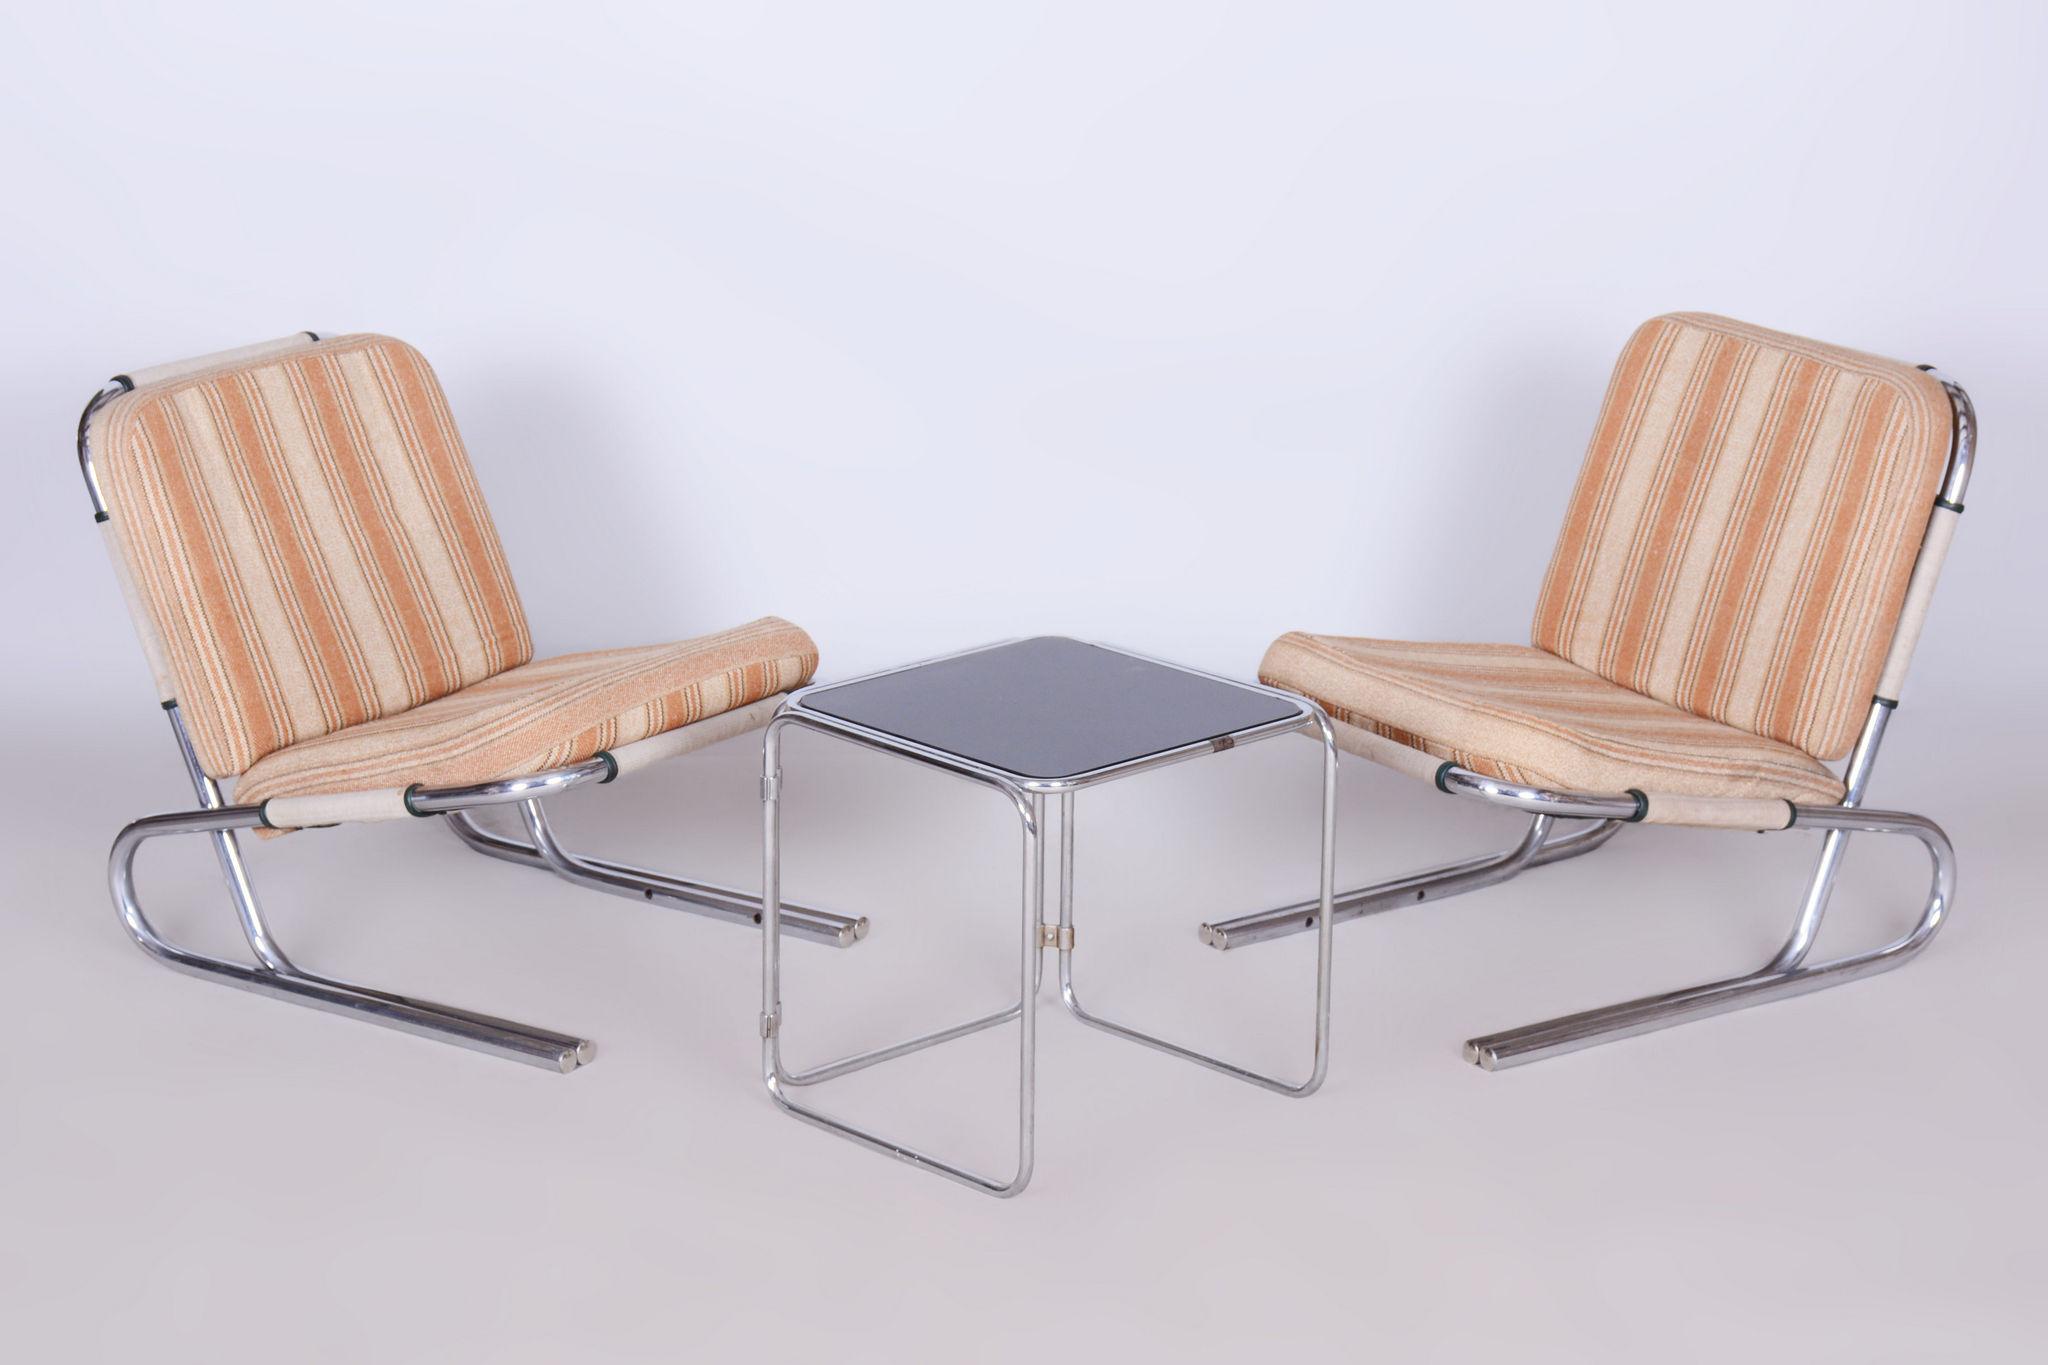 Mid-20th Century Set of Two Original Bauhaus Armchairs, Chrome-Plated Steel, Germany, 1940s For Sale